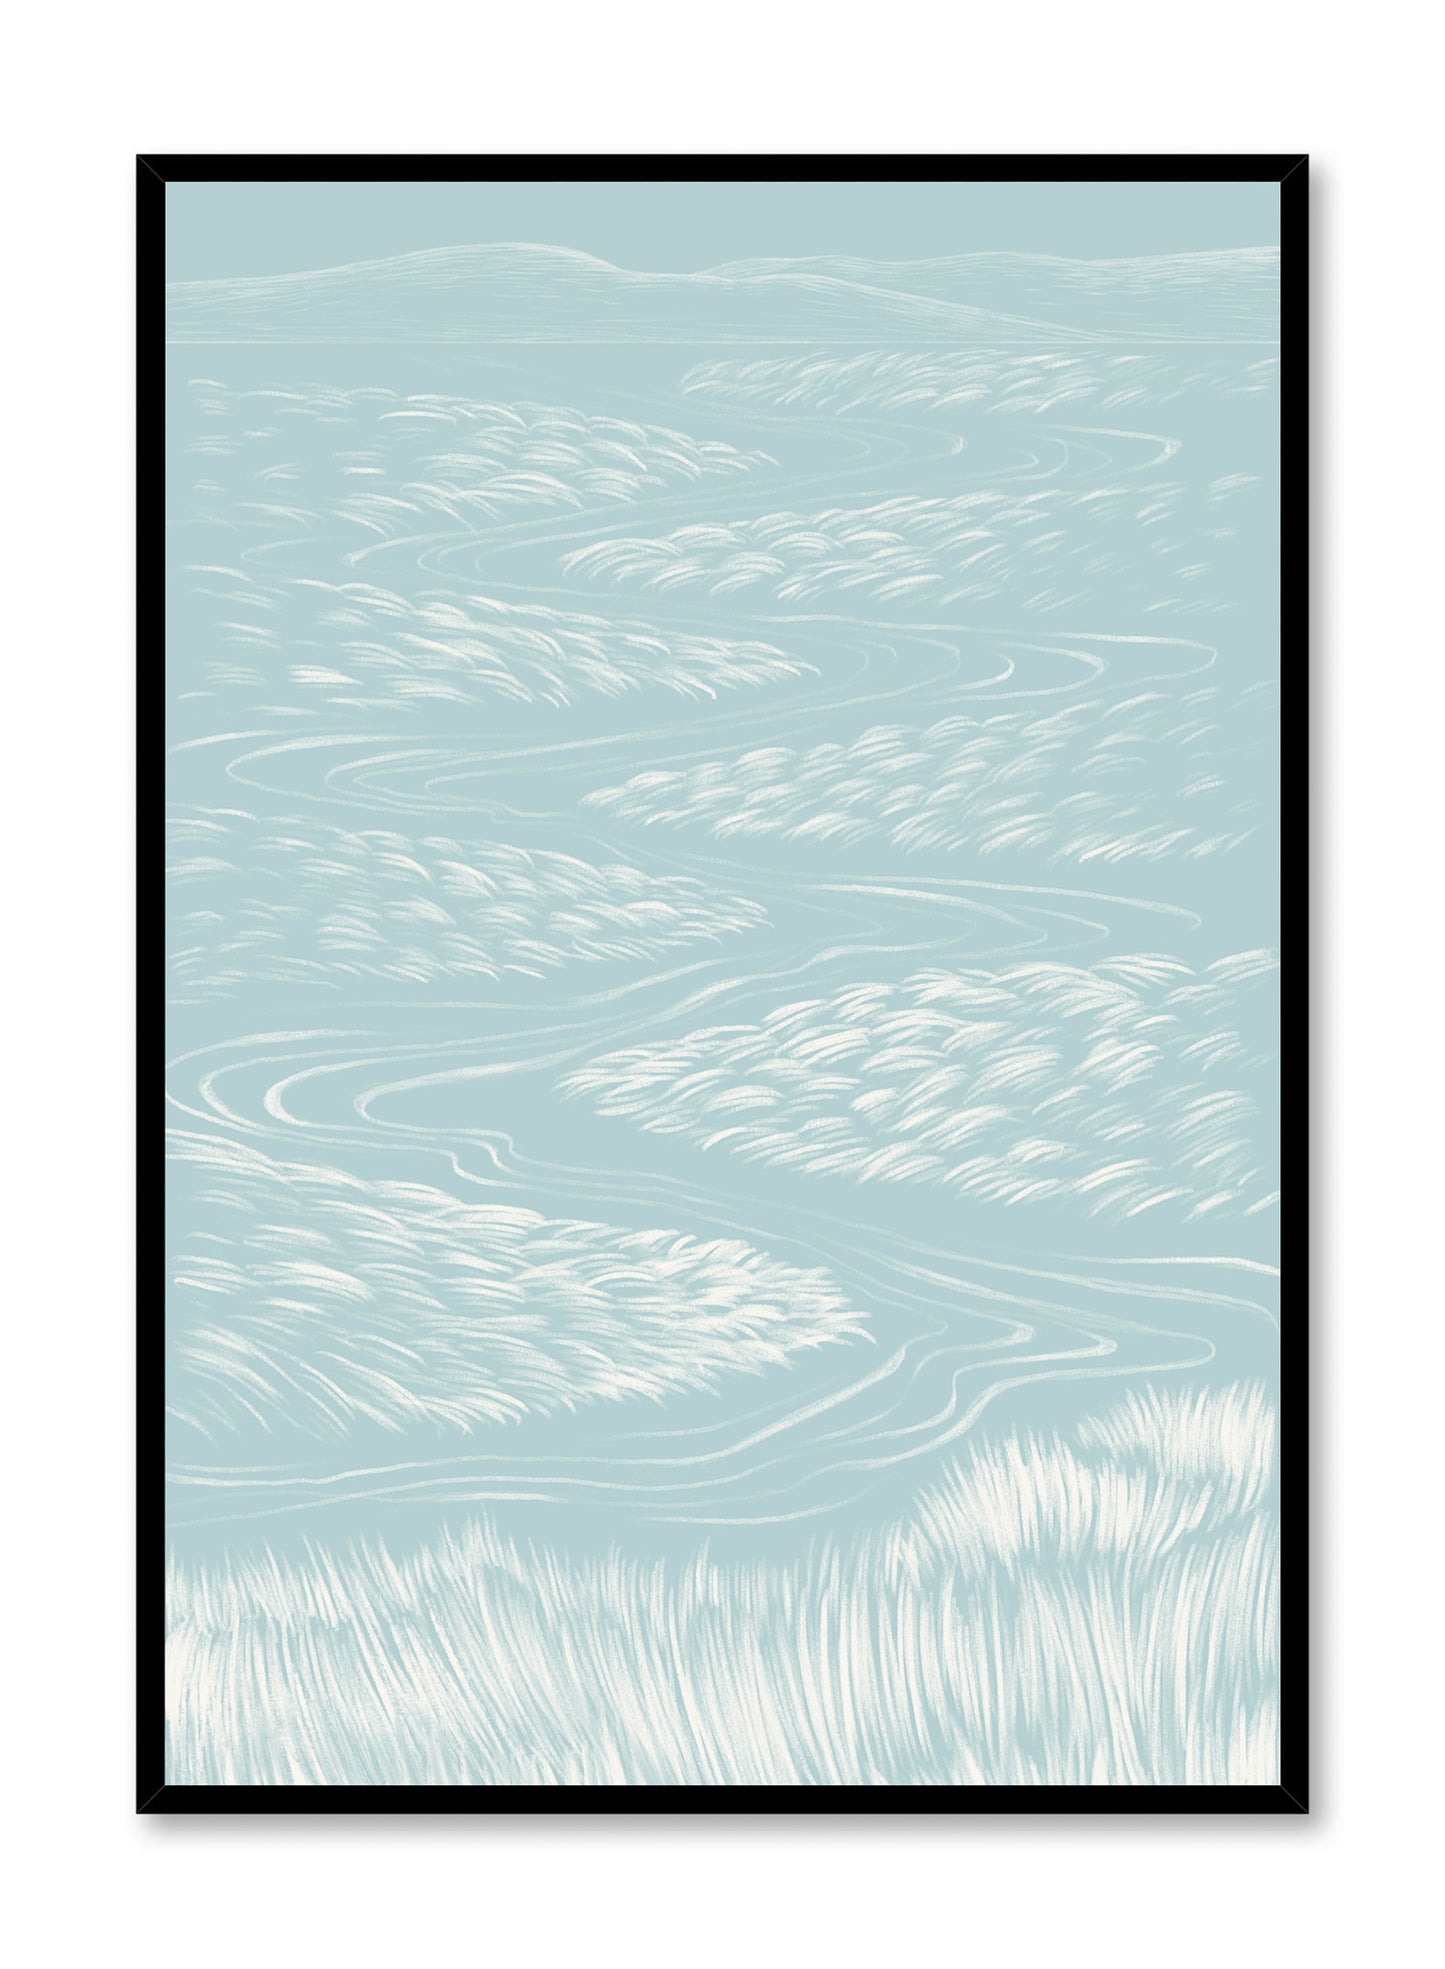 Sinuous Stream, Poster